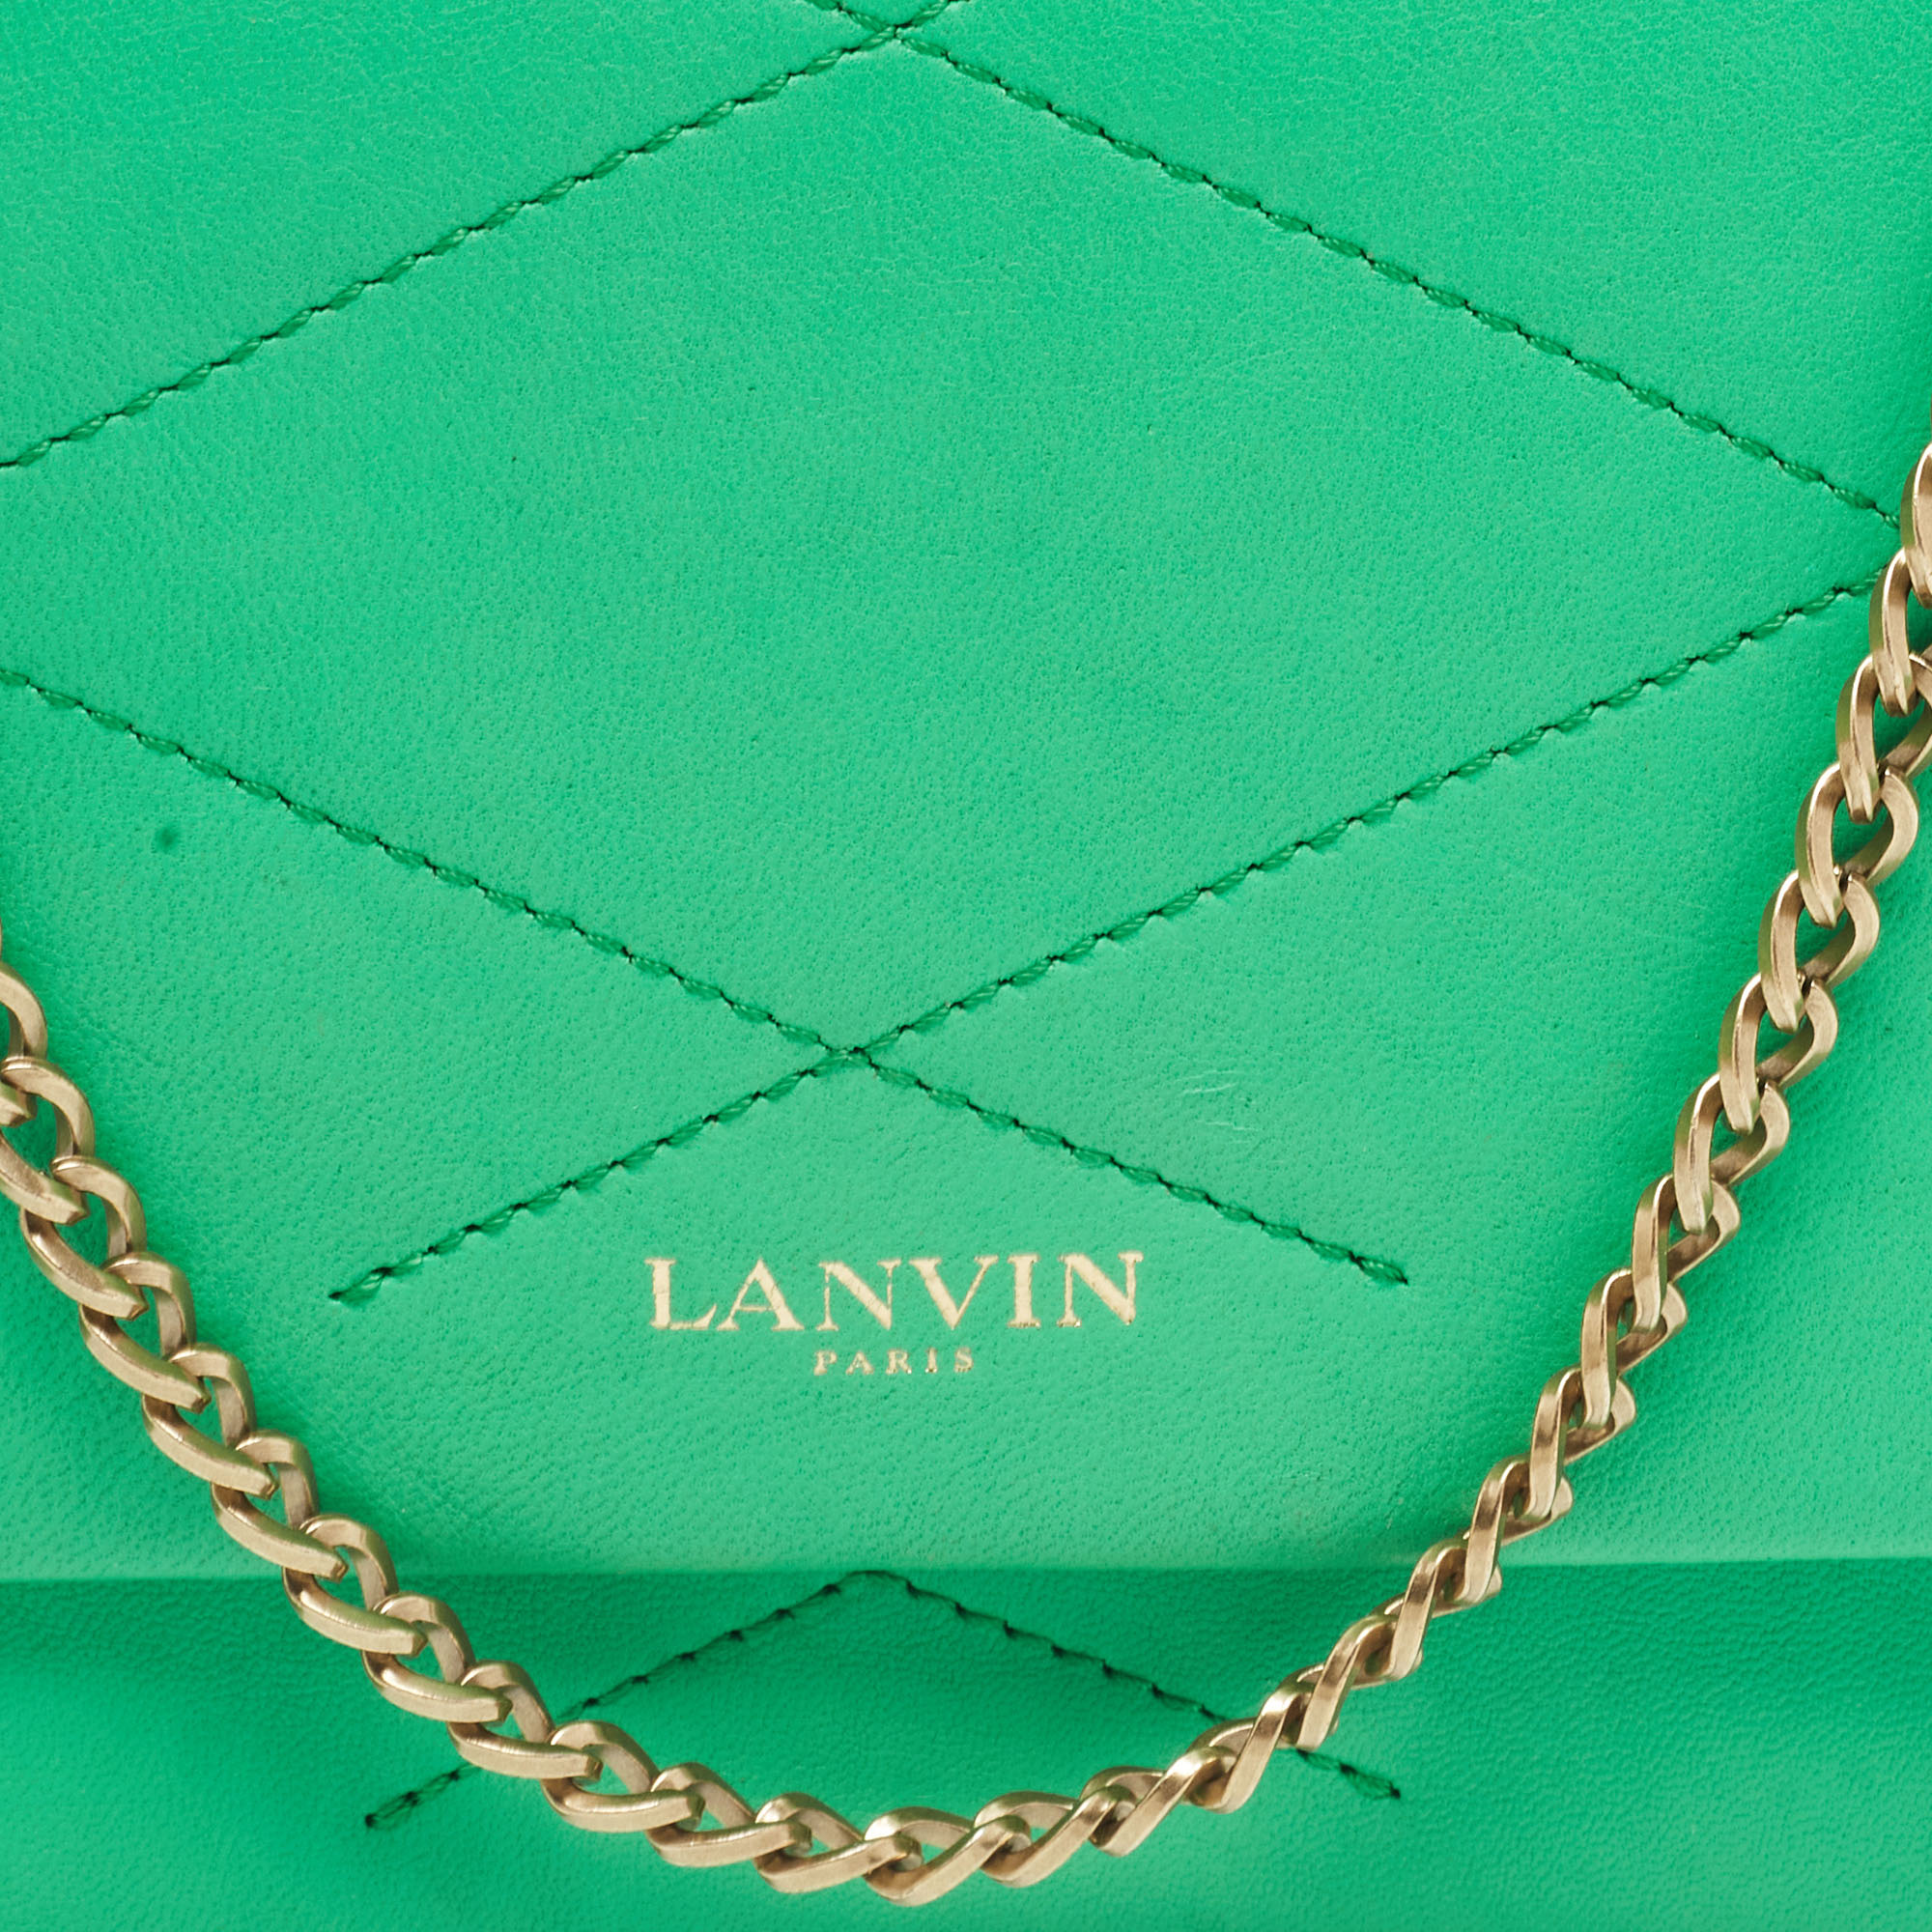 Lanvin Green Leather Flap Chain Clutch